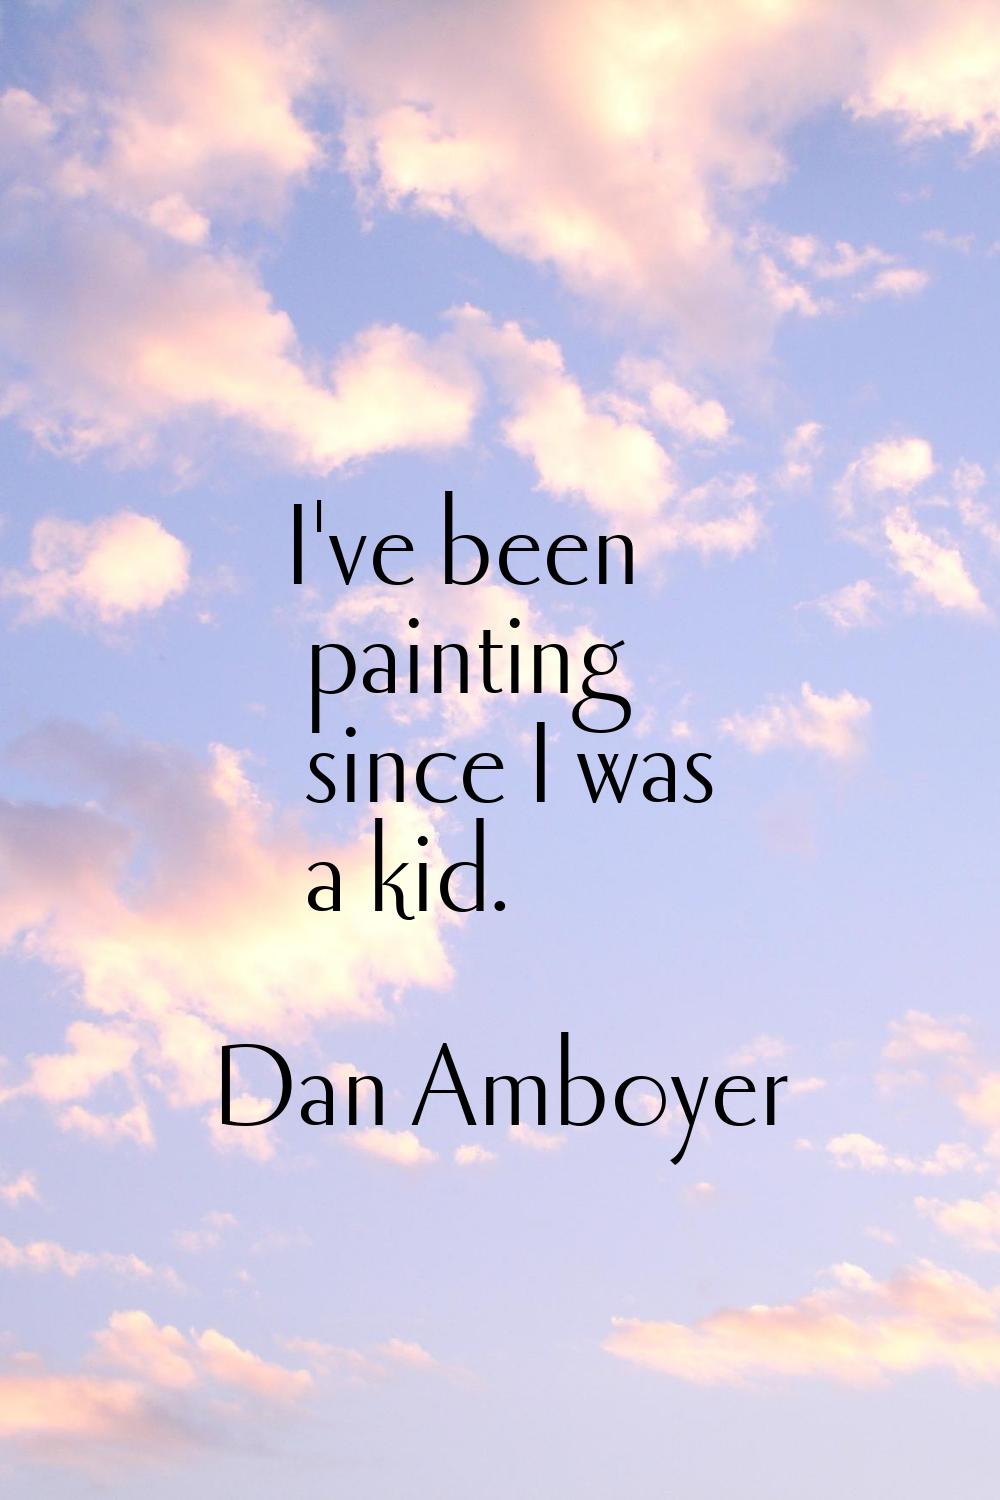 I've been painting since I was a kid.